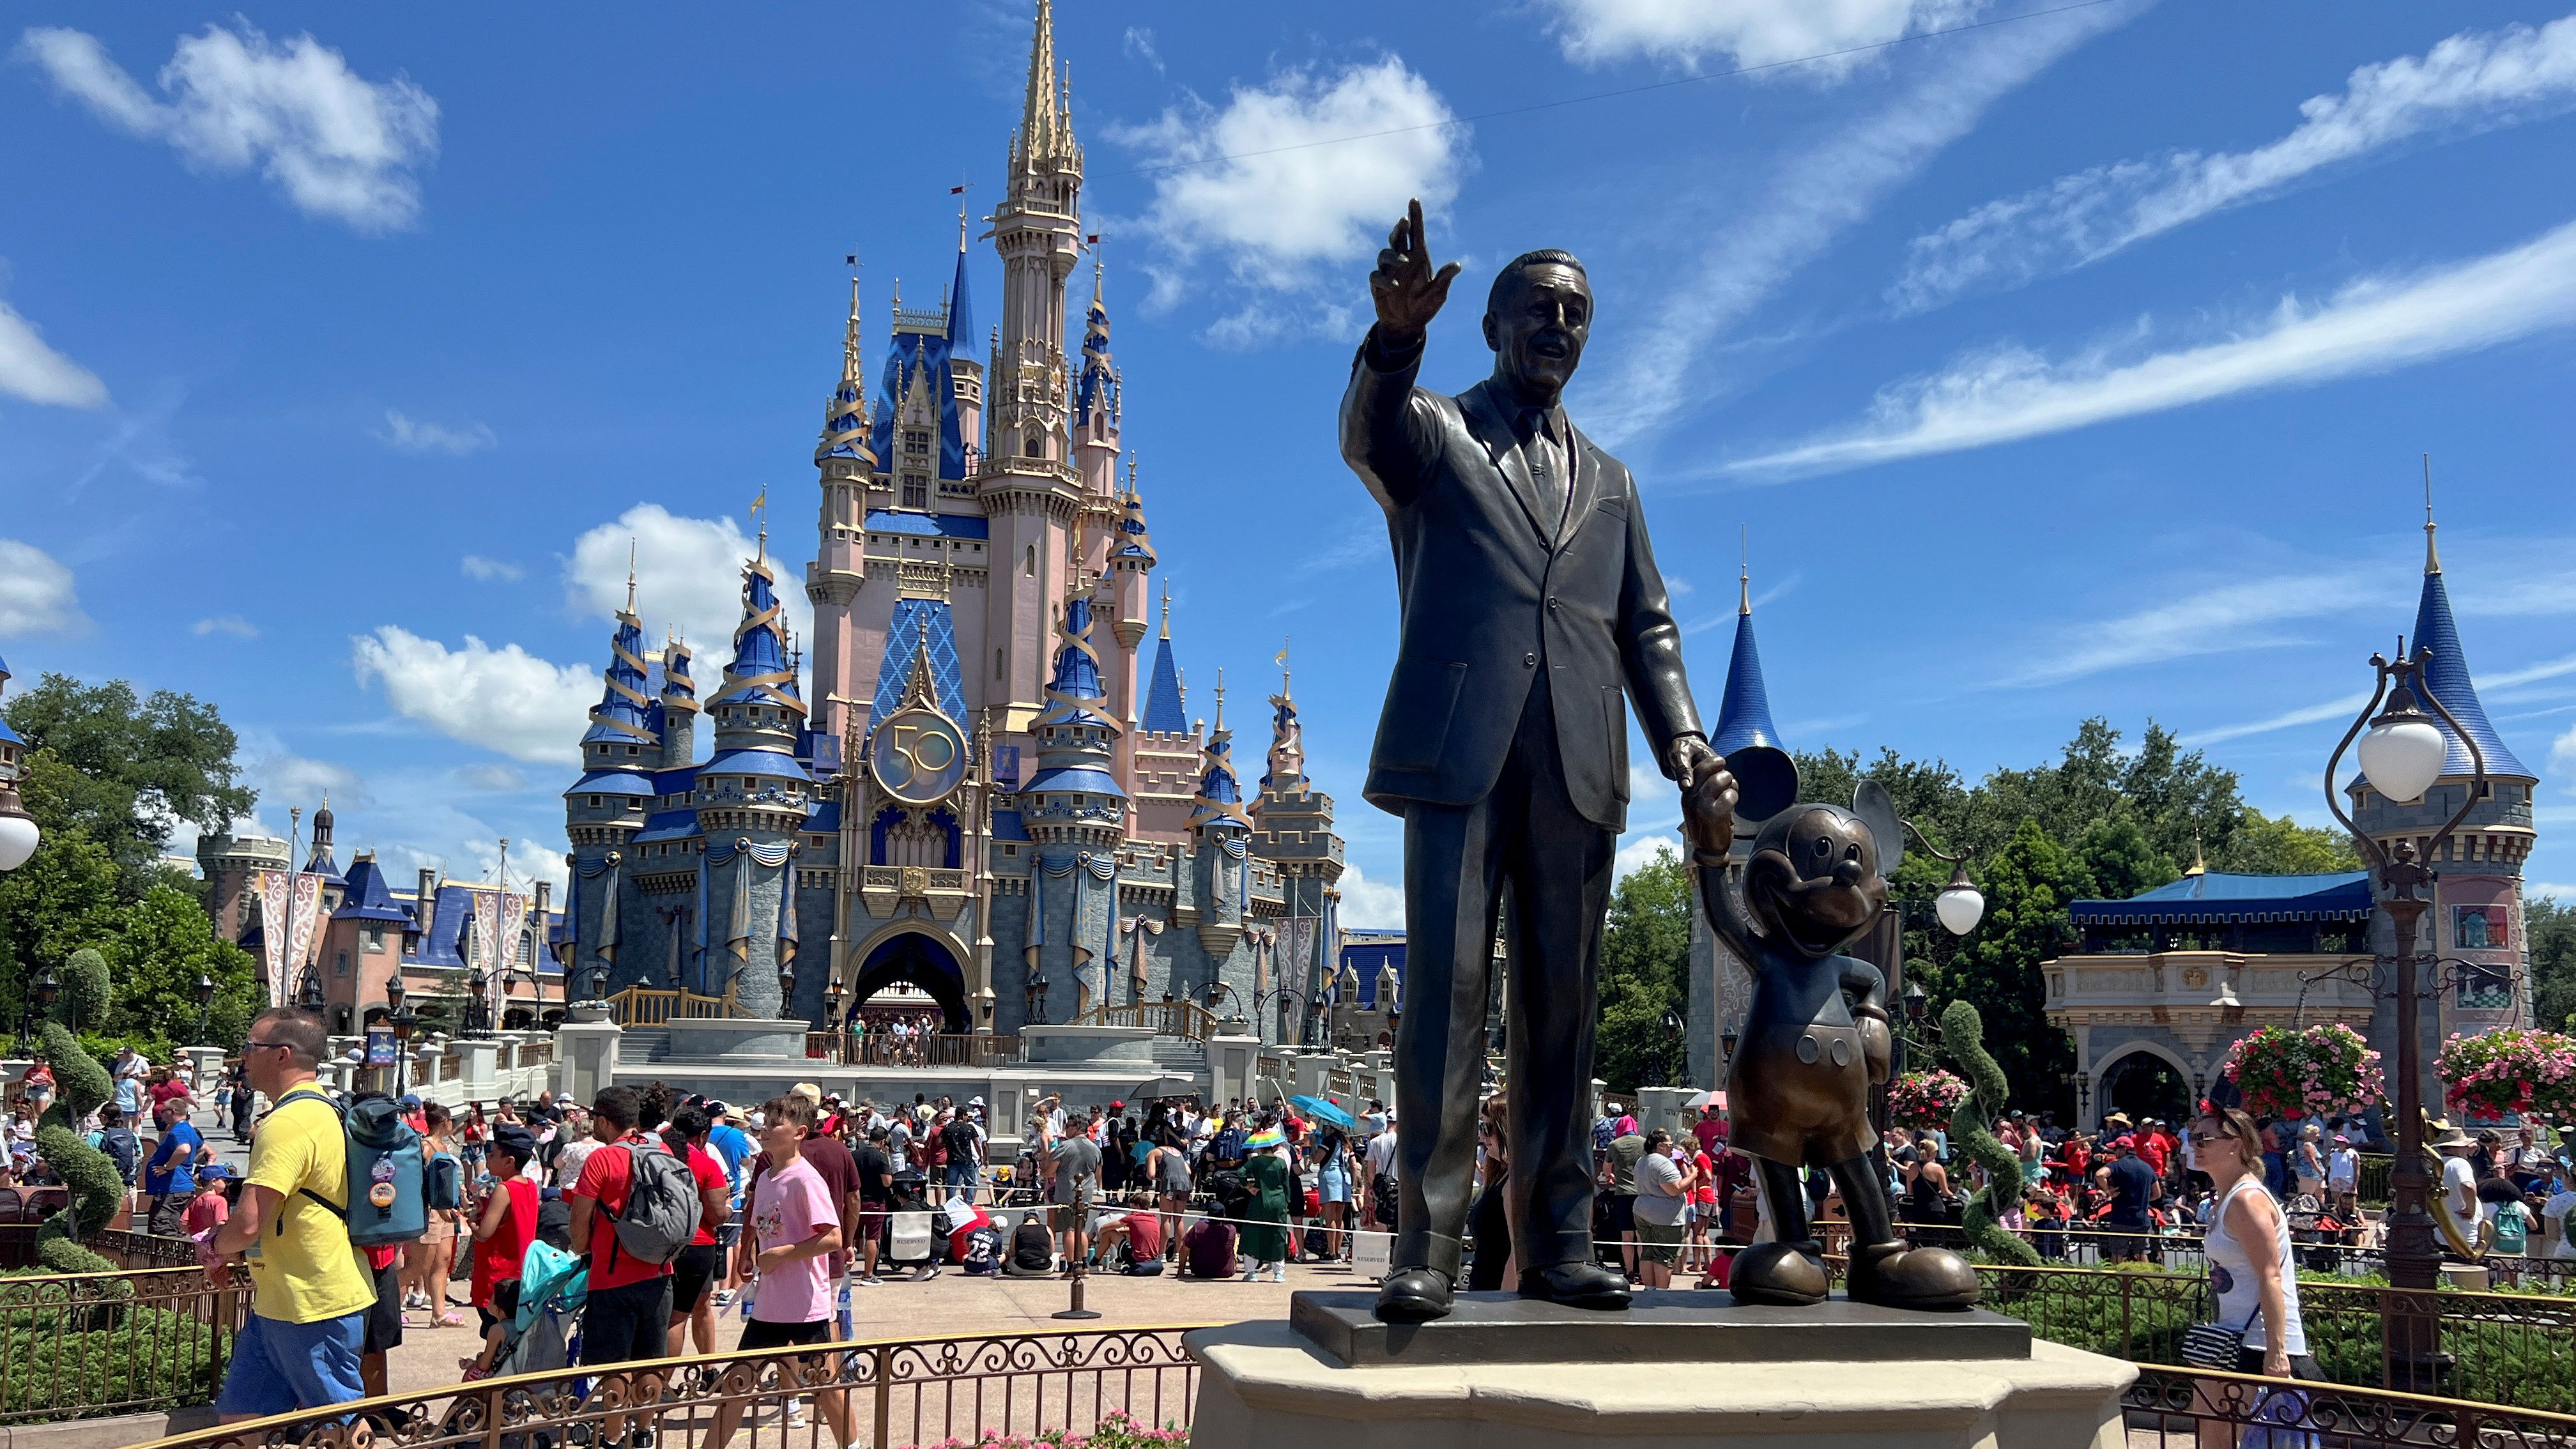 People gather at the Magic Kingdom theme park before the "Festival of Fantasy" parade at Walt Disney World in Orlando, Florida, U.S. July 30, 2022.